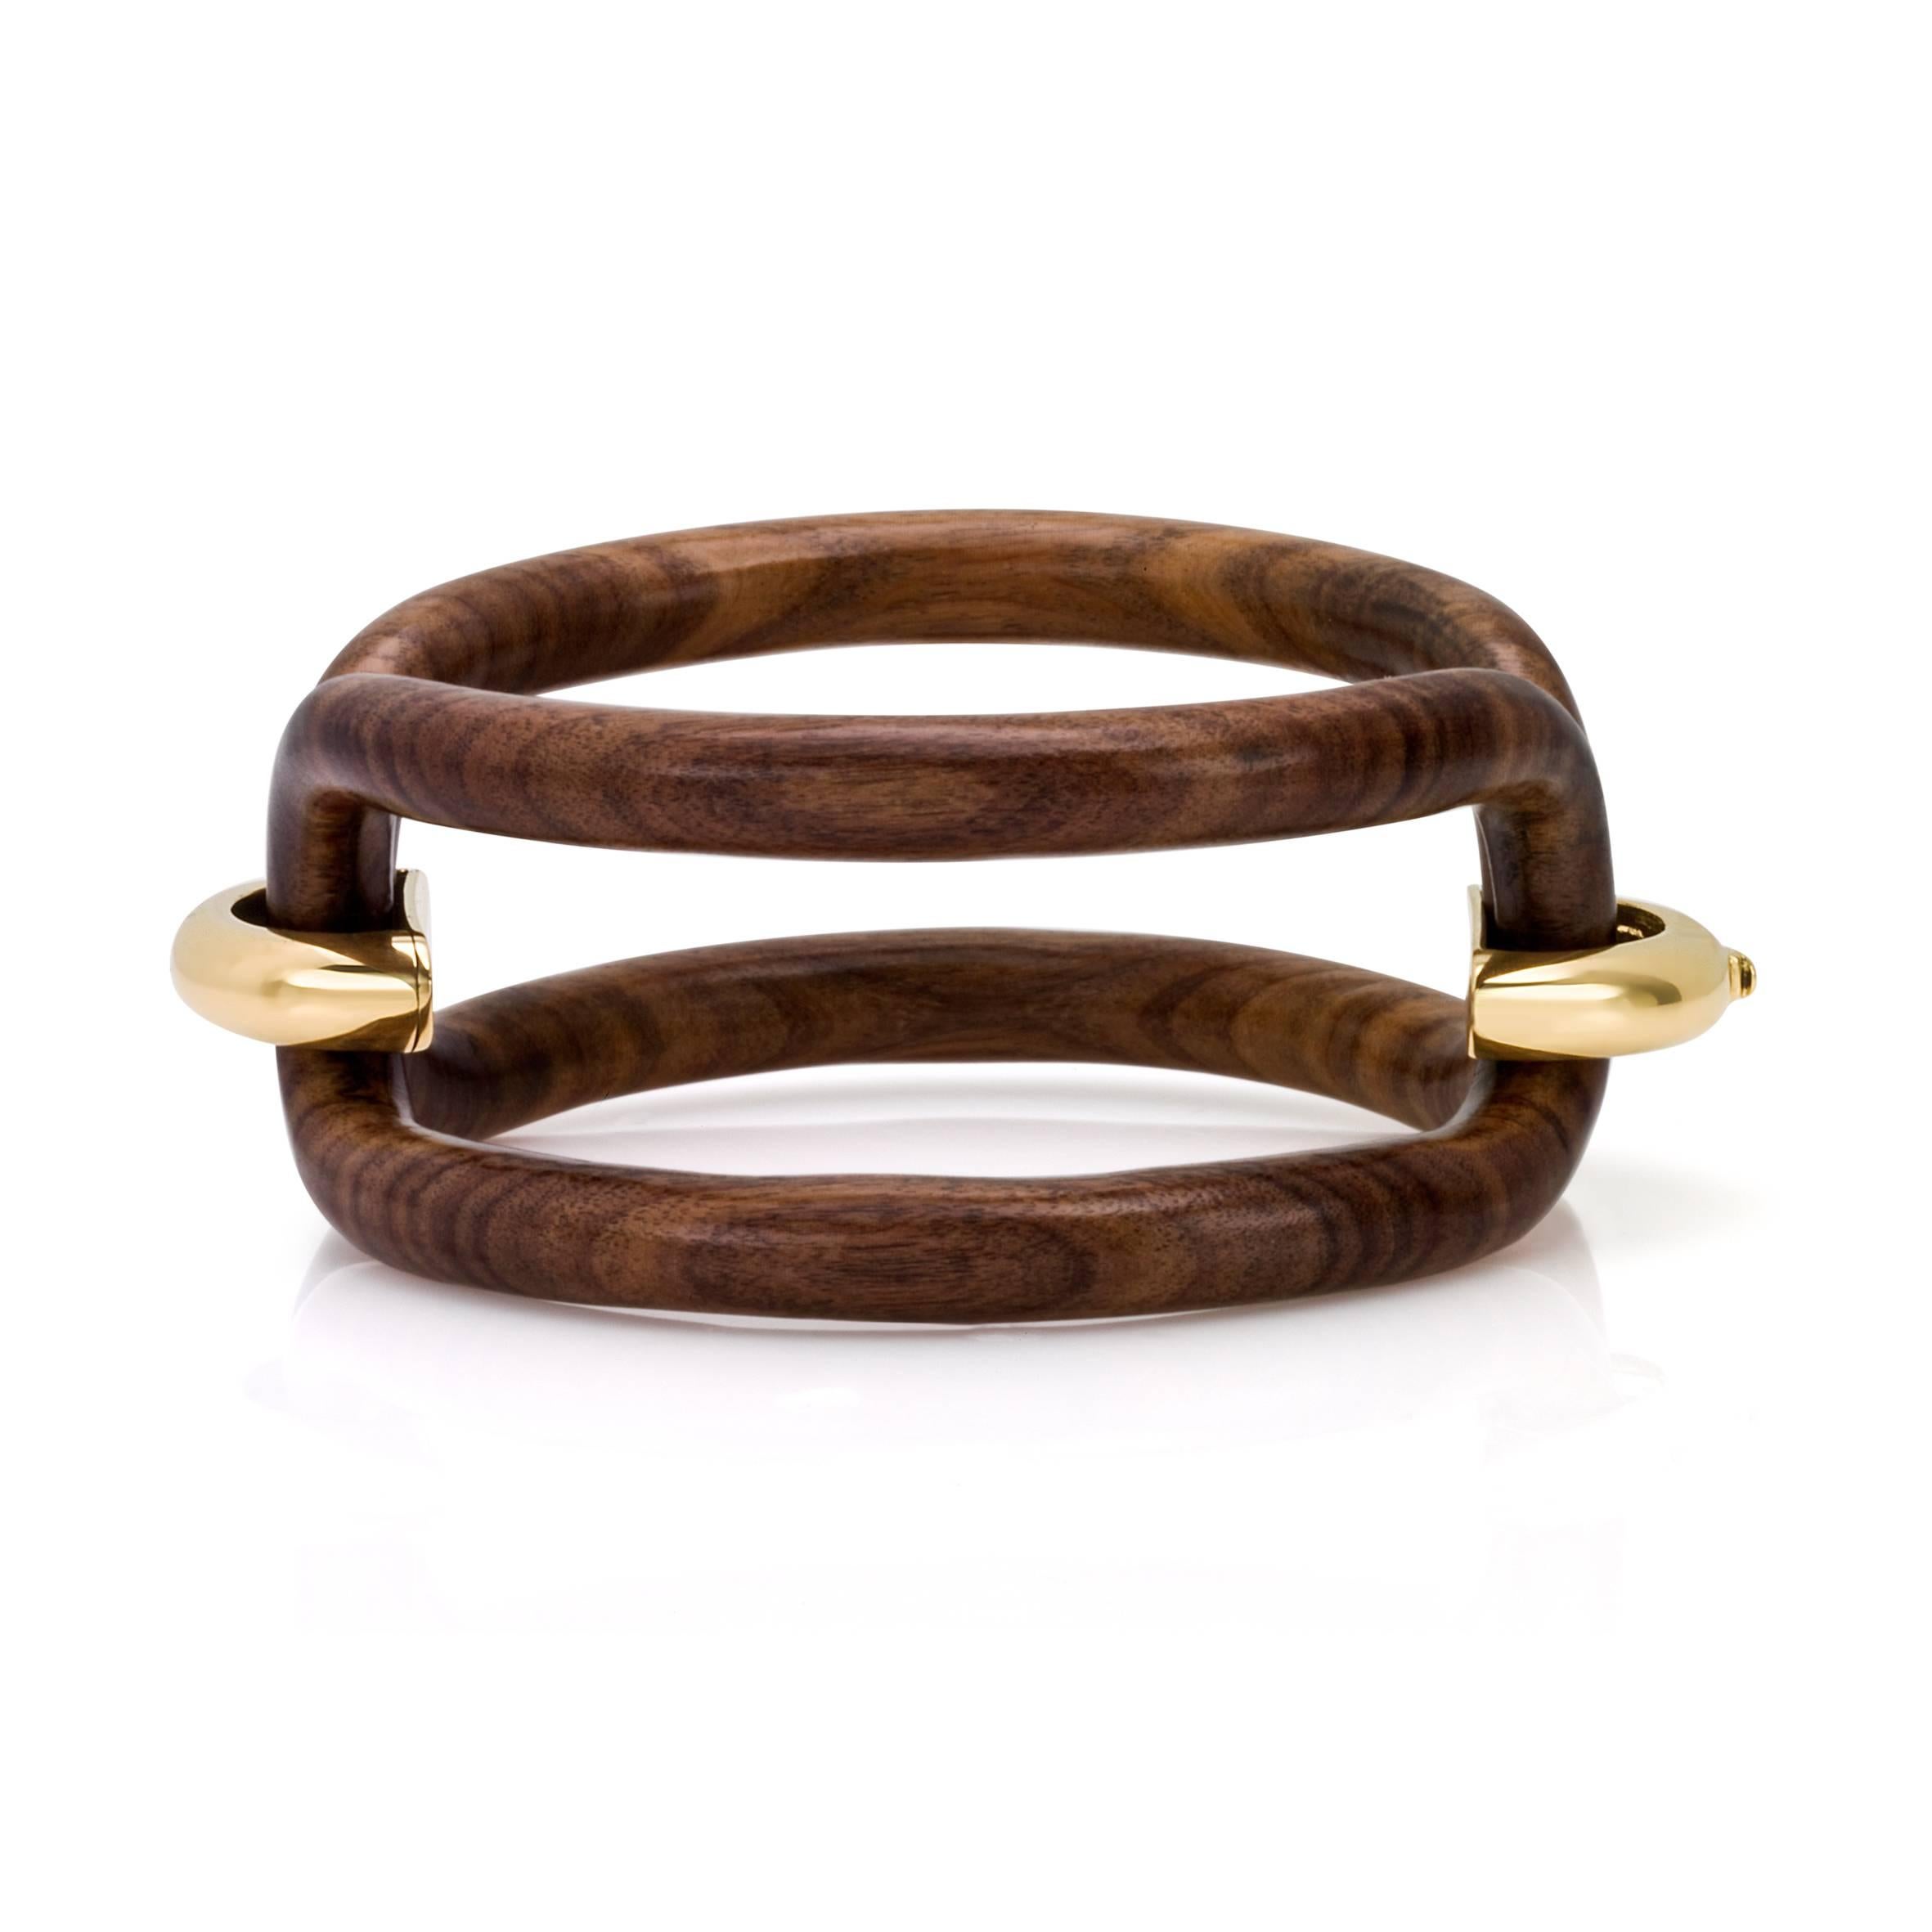 Roberta collection bangle in 18 kt  yellow gold and rose wood
The newest and more popular collection of his year

the total weight of the gold is  gr 11.80

STAMP: 10 MI ITALY 750
